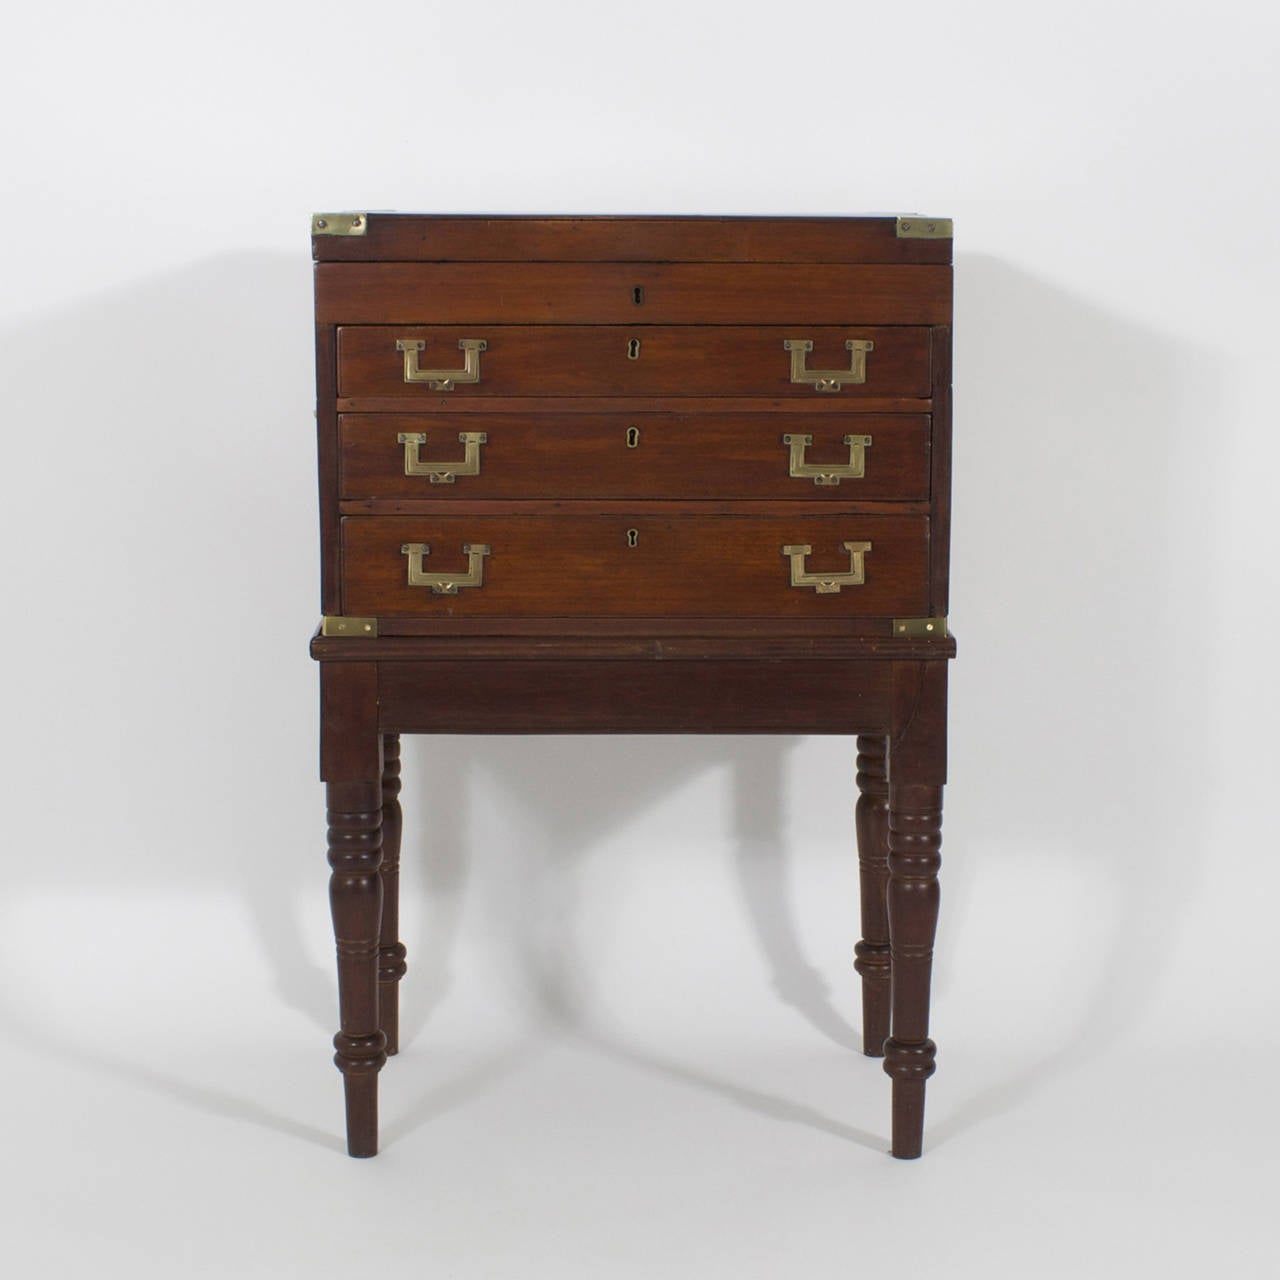 An uncommon 19th century, English mahogany three-drawer Campaign chest for silverware with hinged lidded top, presented on a custom-made later mahogany stand with turned legs. Perfect for maintaining an Empire while dining in style. Newly polished